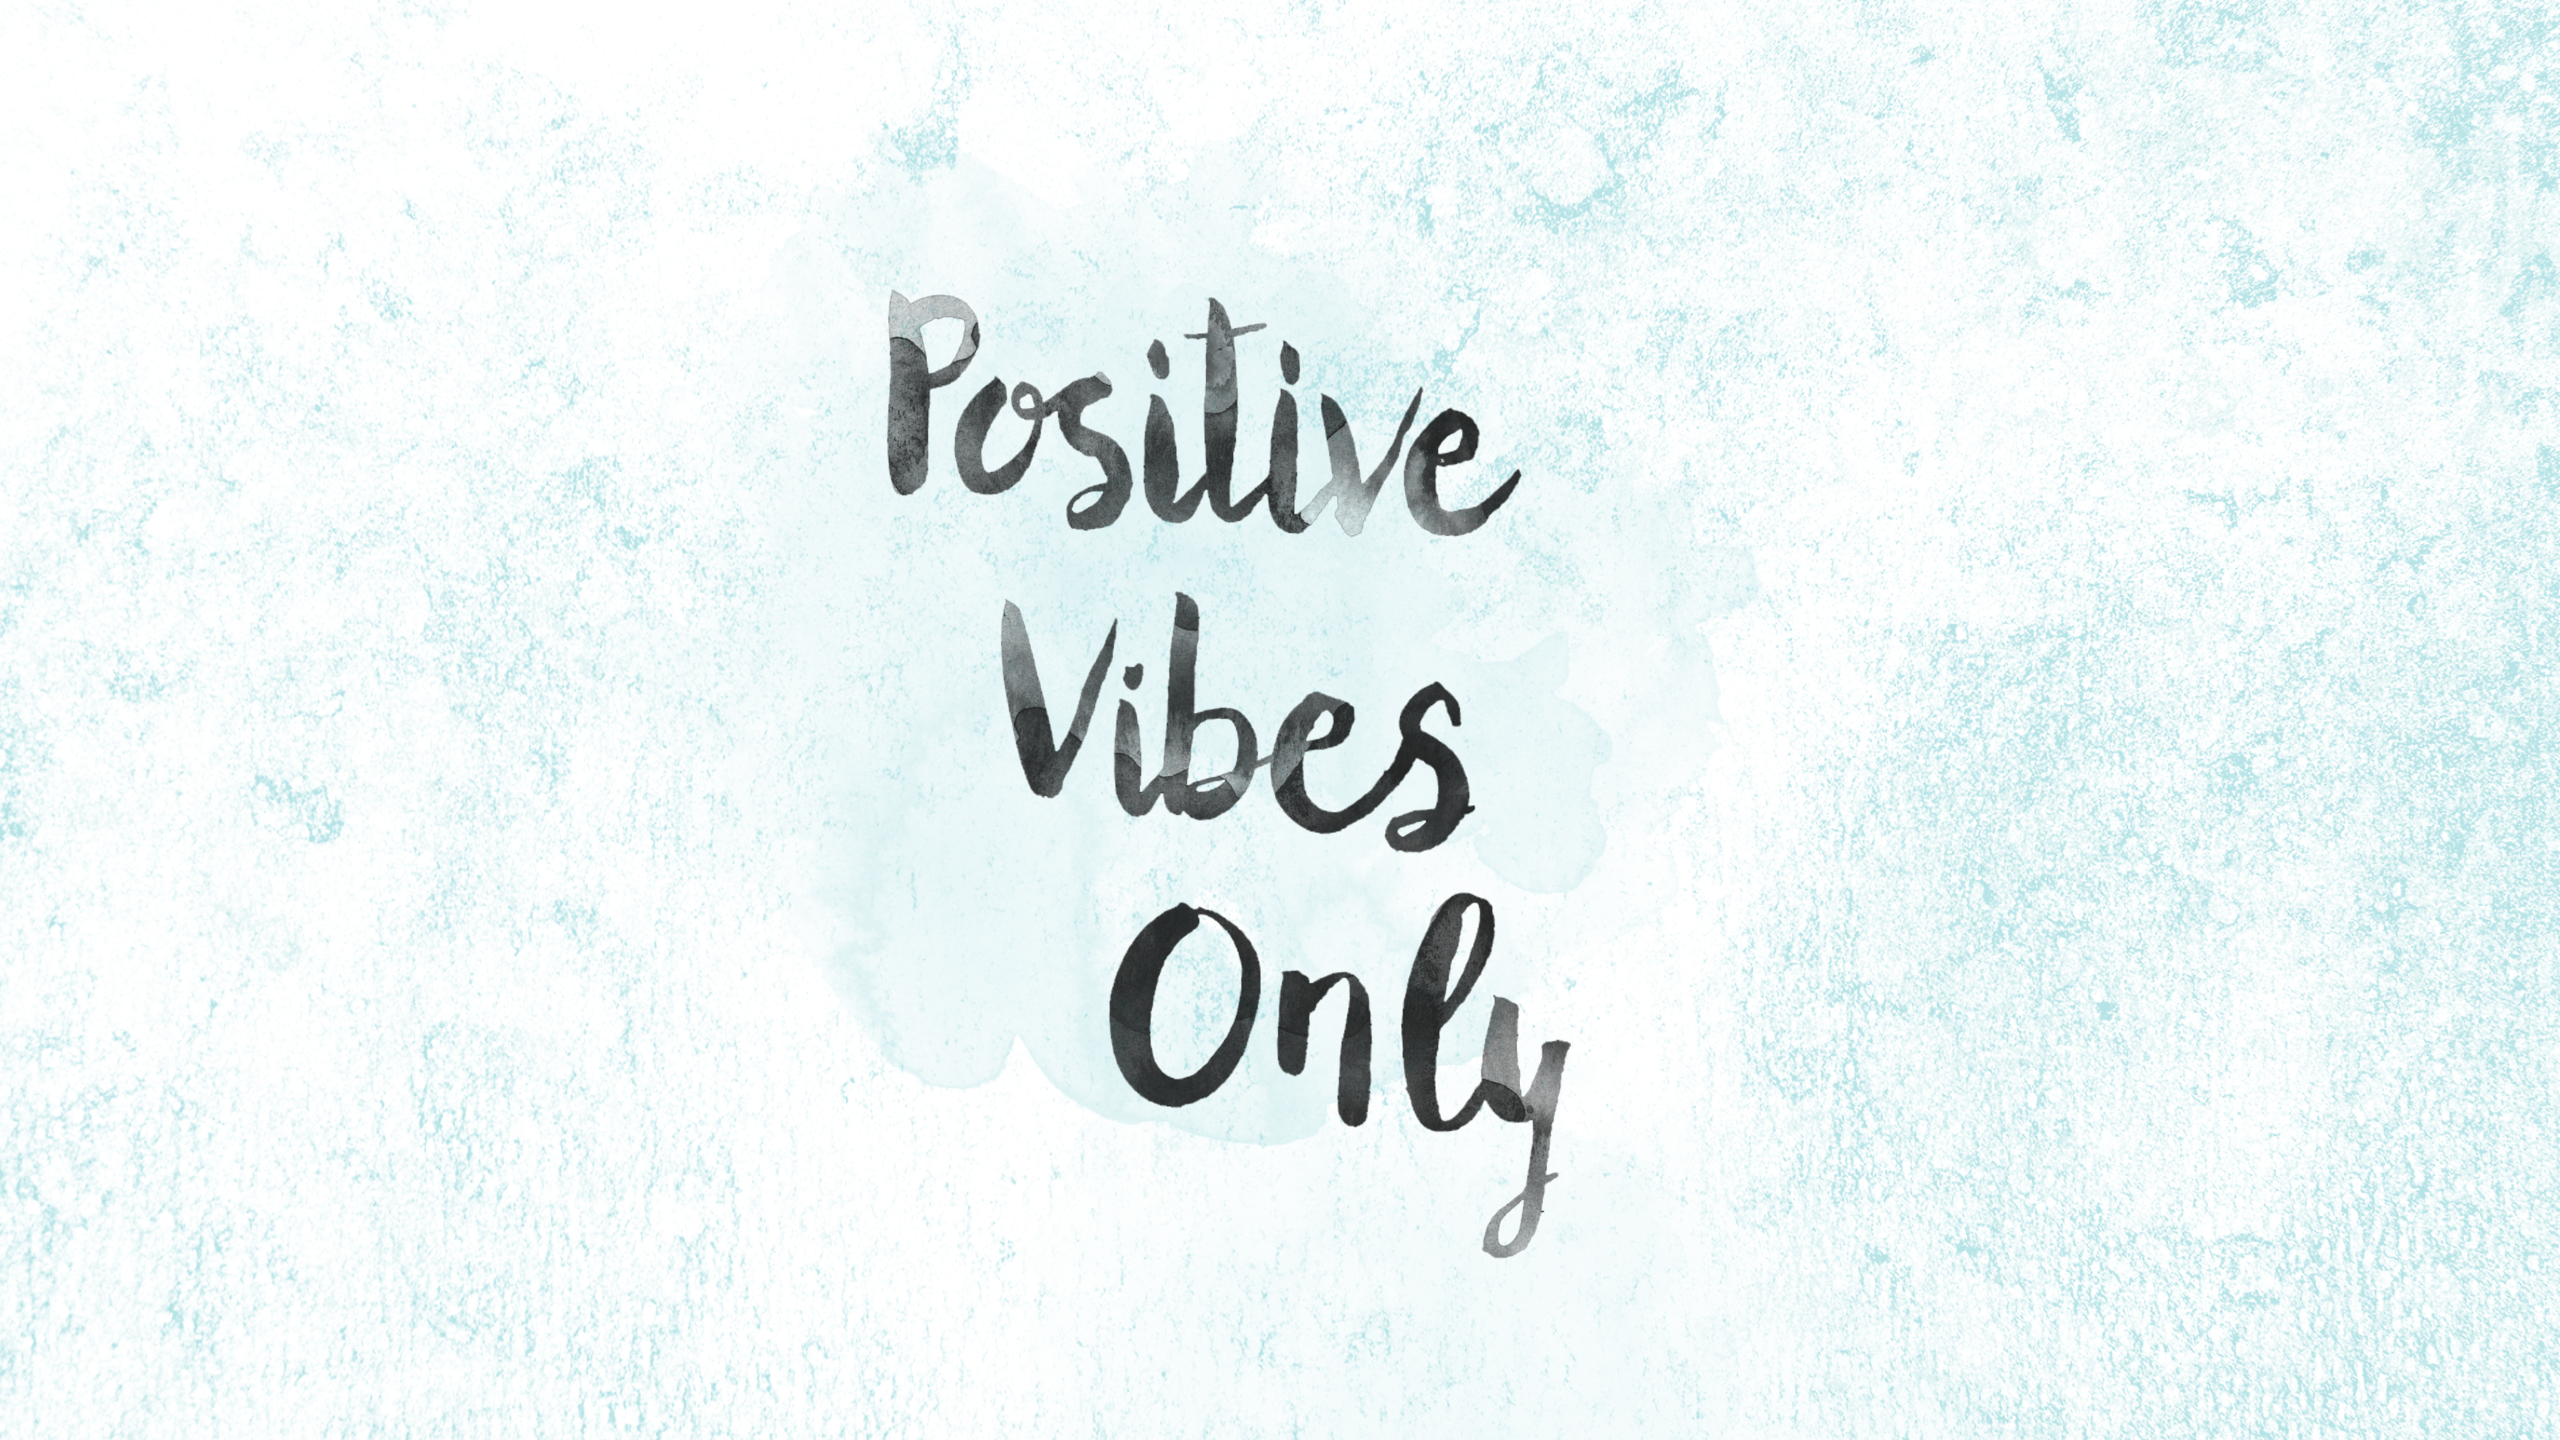 "Positive Vibes Only" - N.A.H.